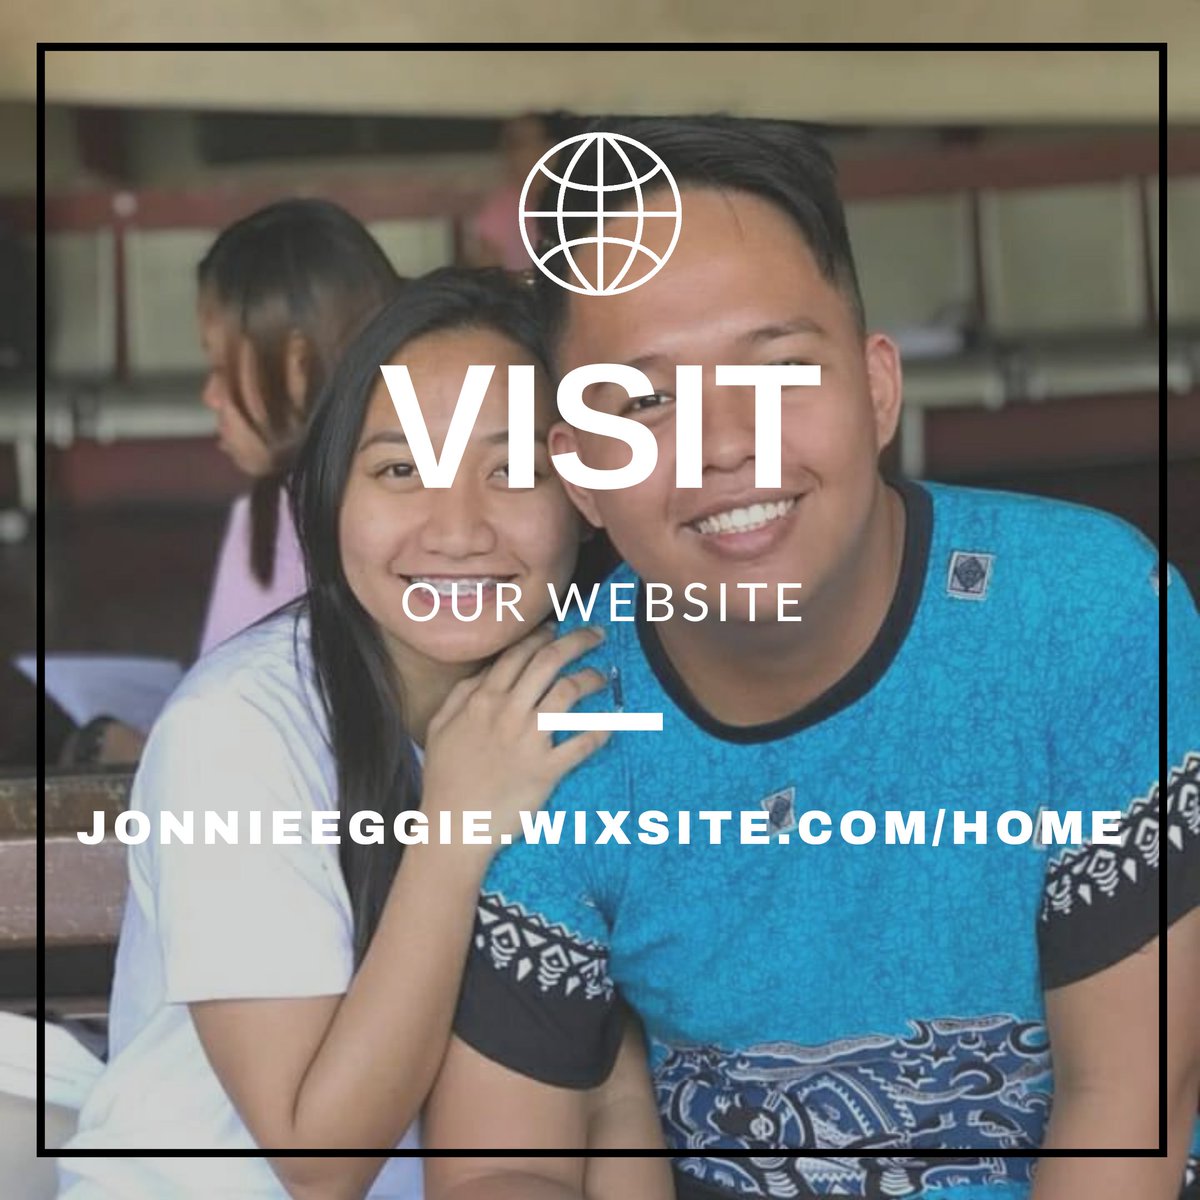 Check out our first blog at jonnieeggie.wixsite.com/home
.
.
.
.
.
#welcome #bloggers #blogging #blogpromotion #bloggerlife #ontheblog #lifestyleblog #blog #risingtidesociety #finditliveit #seekthesimplicity #dedication #dreams #documentyourdays #holdyourmoments #simpleliving